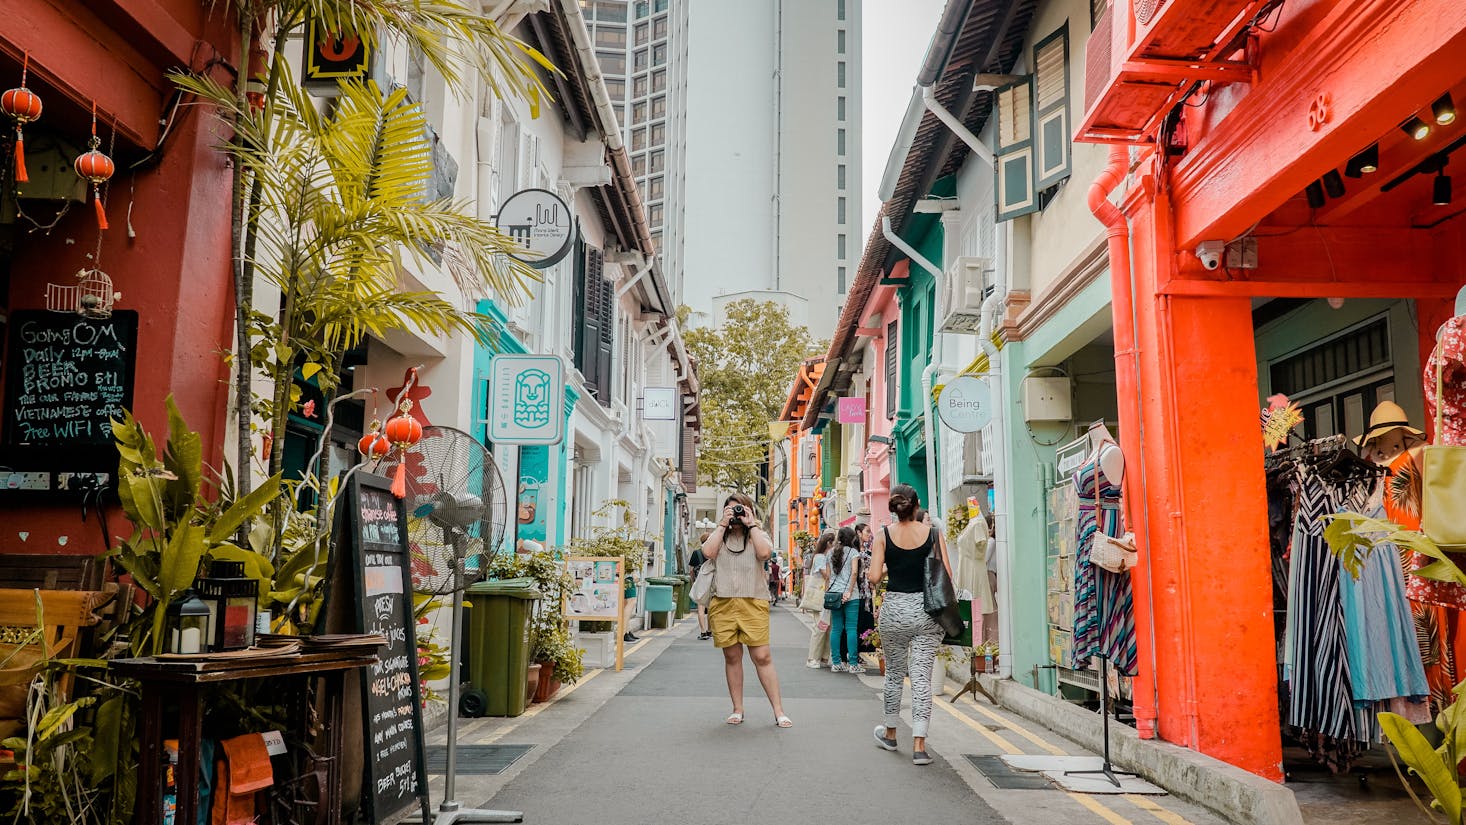 Shopping locations in Singapore